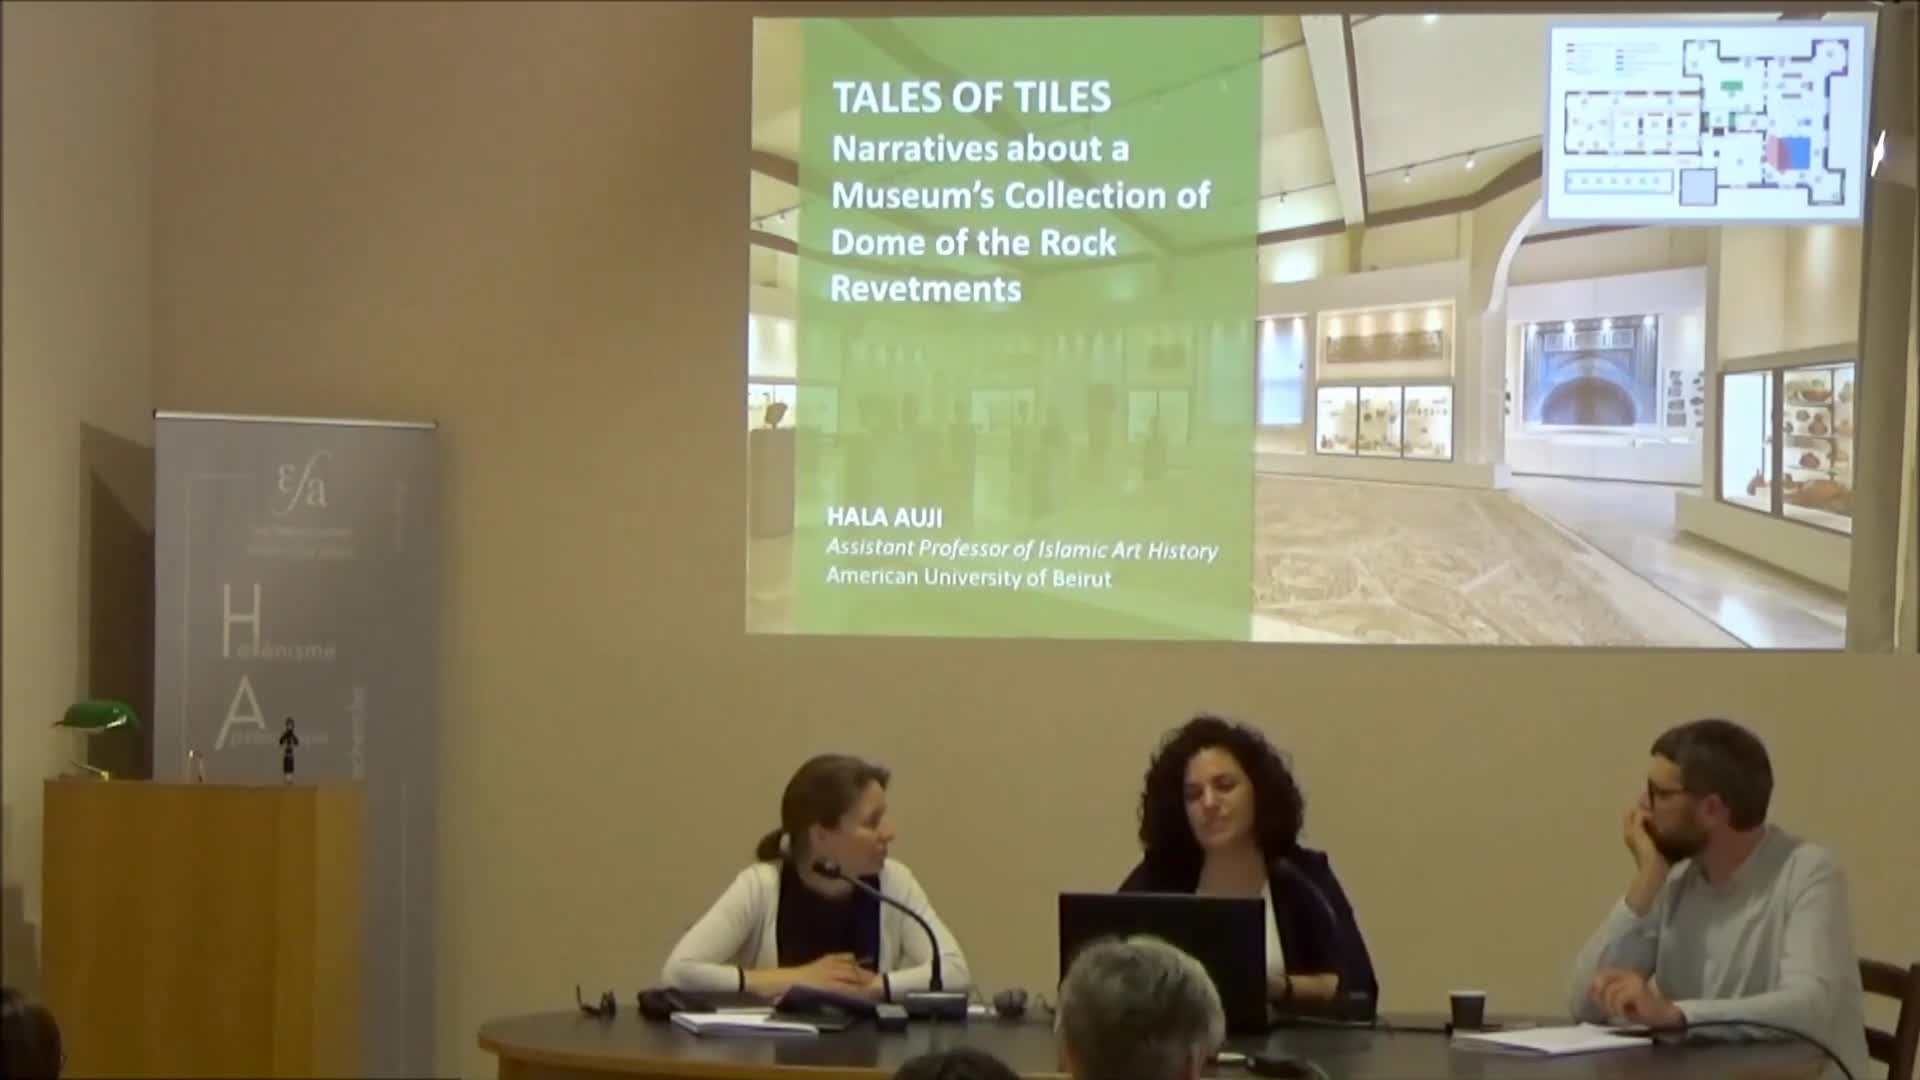 Tales of Tiles: Narratives about a Museum’s Collection of Dome of the Rock Revetments (late XIXth)